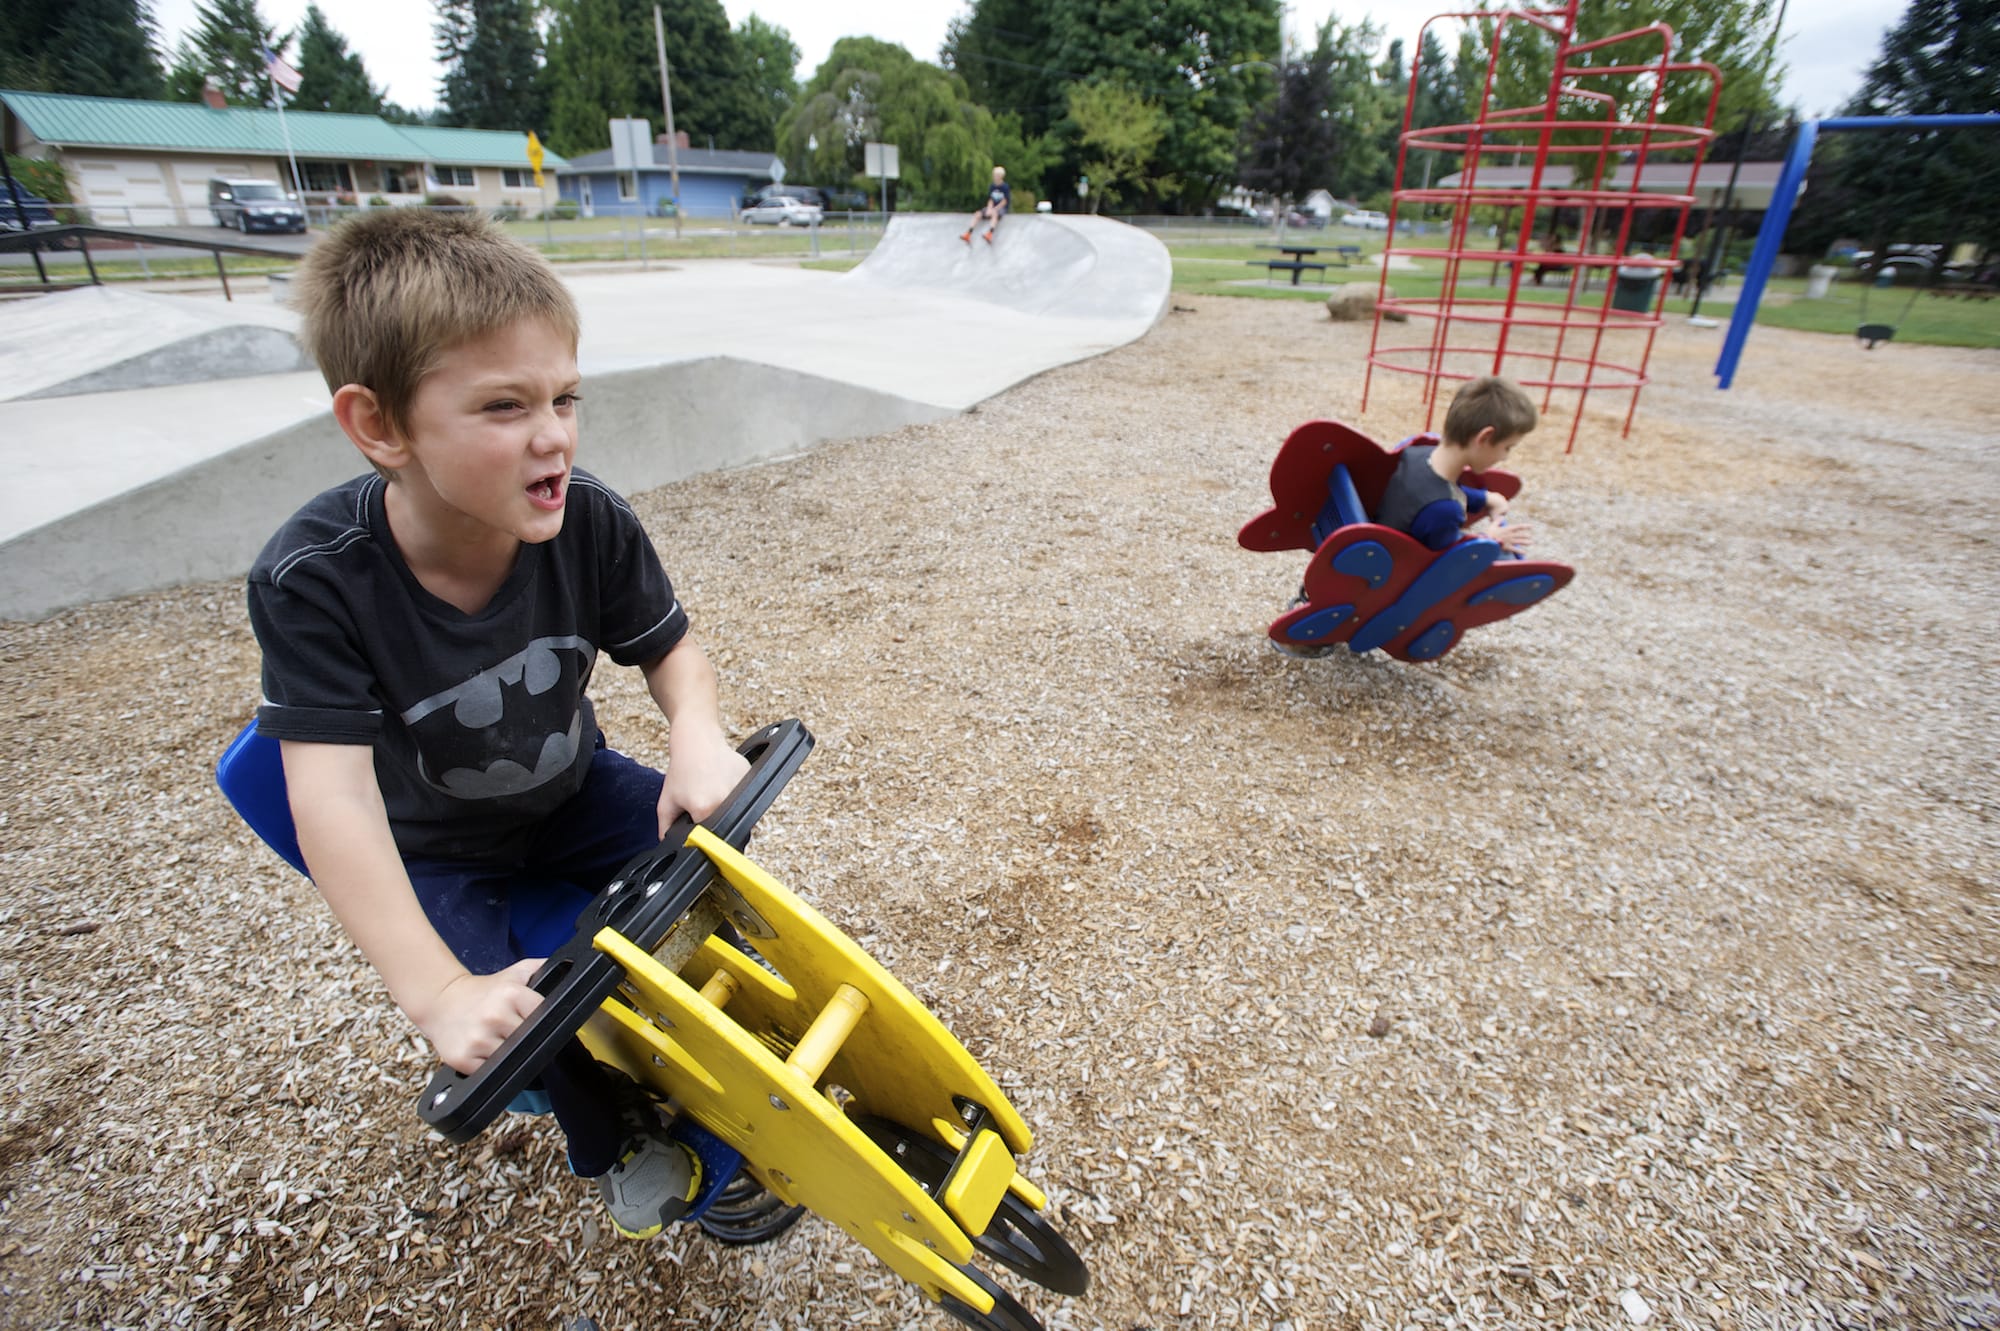 Nicholas Caruthers, 7, left, and Toby Caruthers, 10, both from Vancouver, play at the Yacolt Town Park.